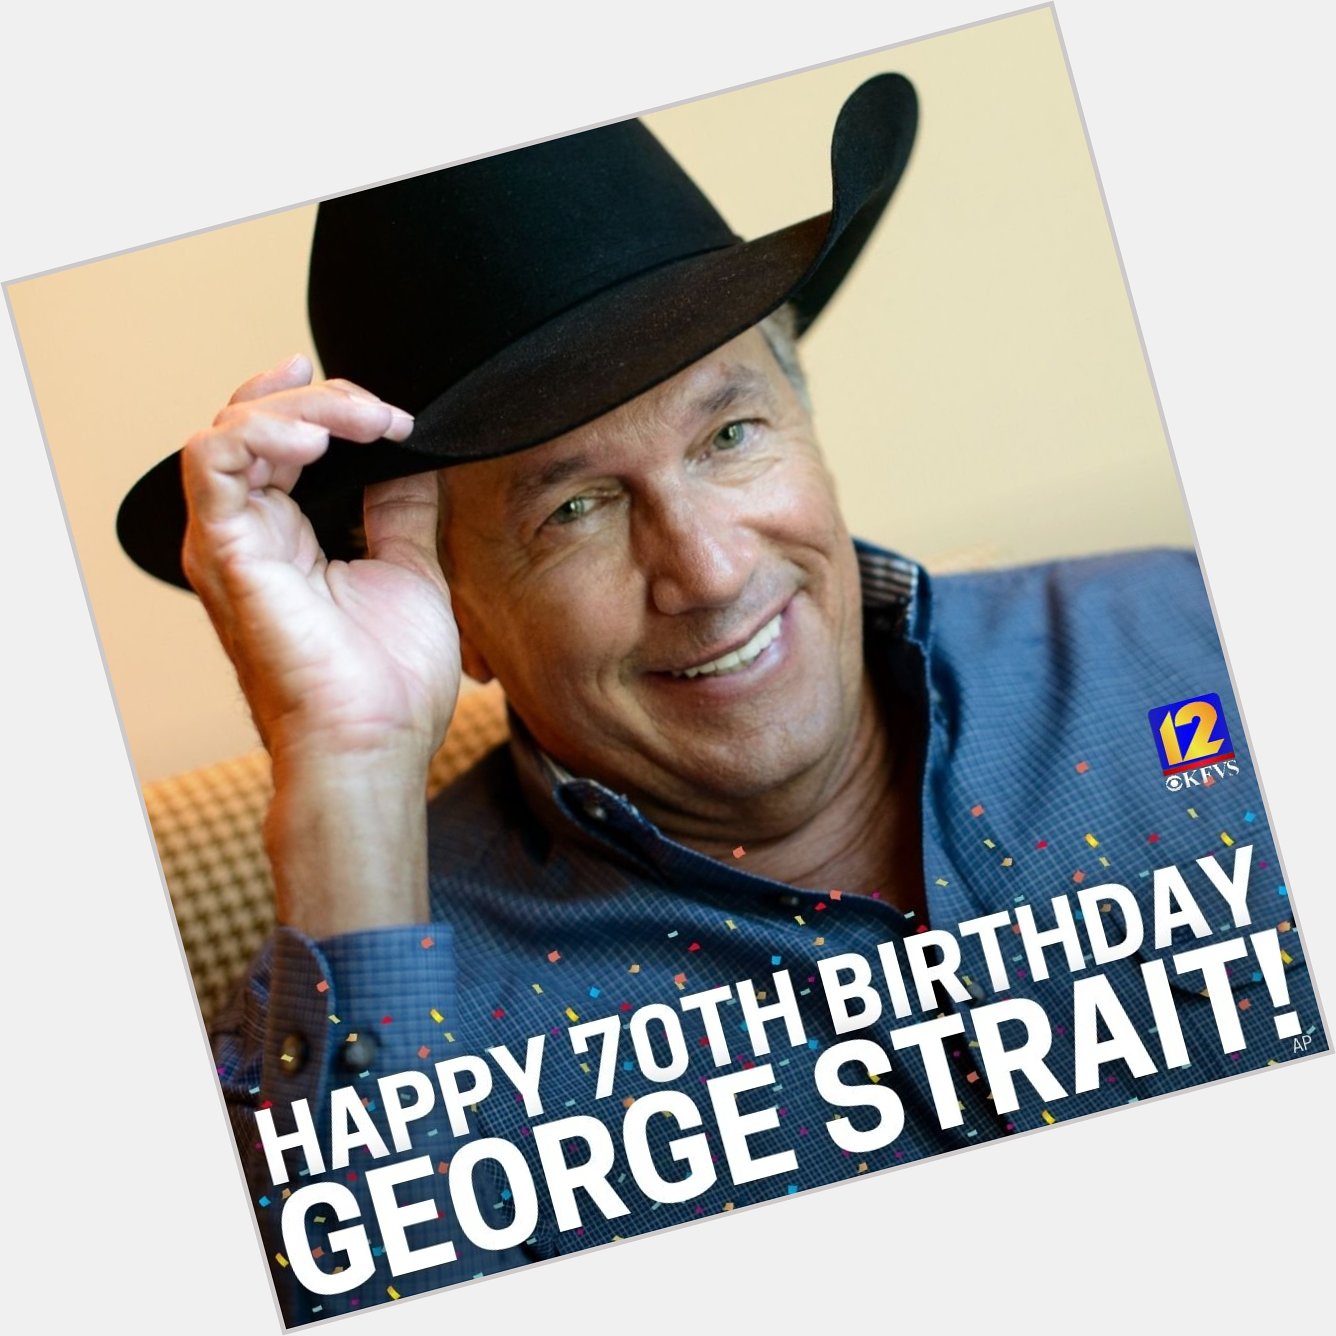 Happy Birthday King George!  What is your favorite George Strait song?   